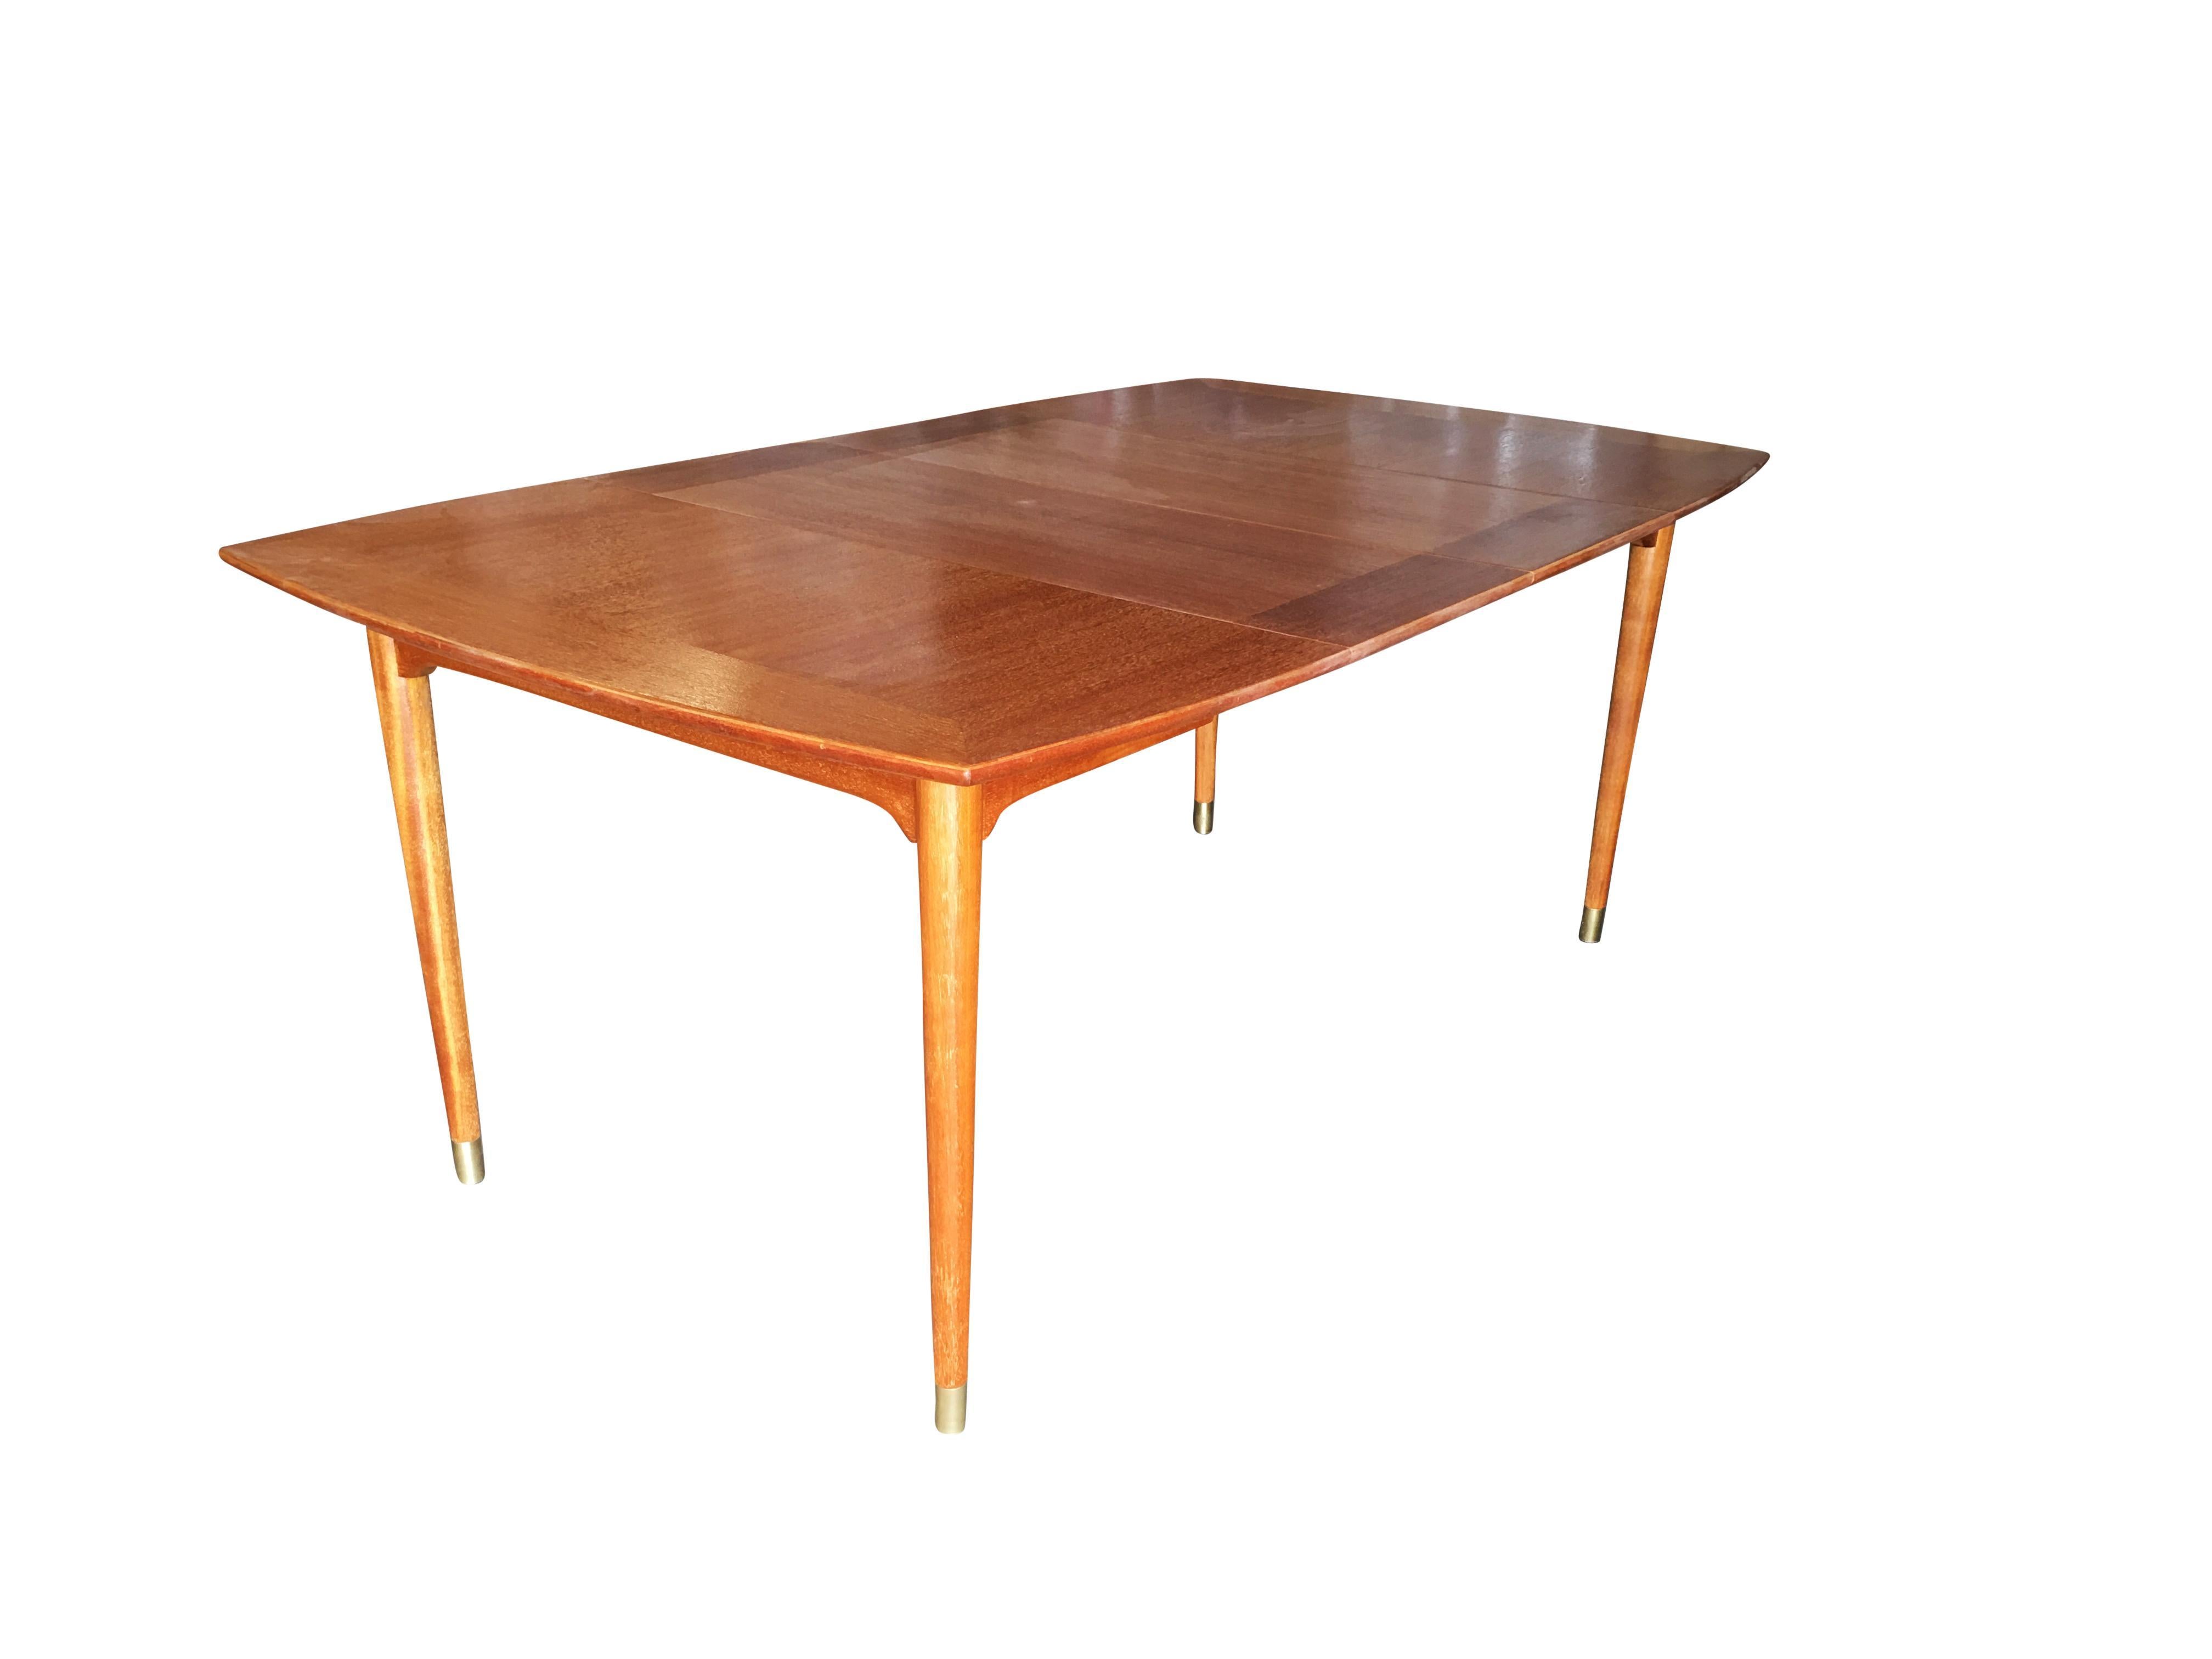 Large midcentury mahogany extendable dining table by John Keal for Brown Saltman featuring well shaped tapered legs and a petite design.
The table features great compact 44